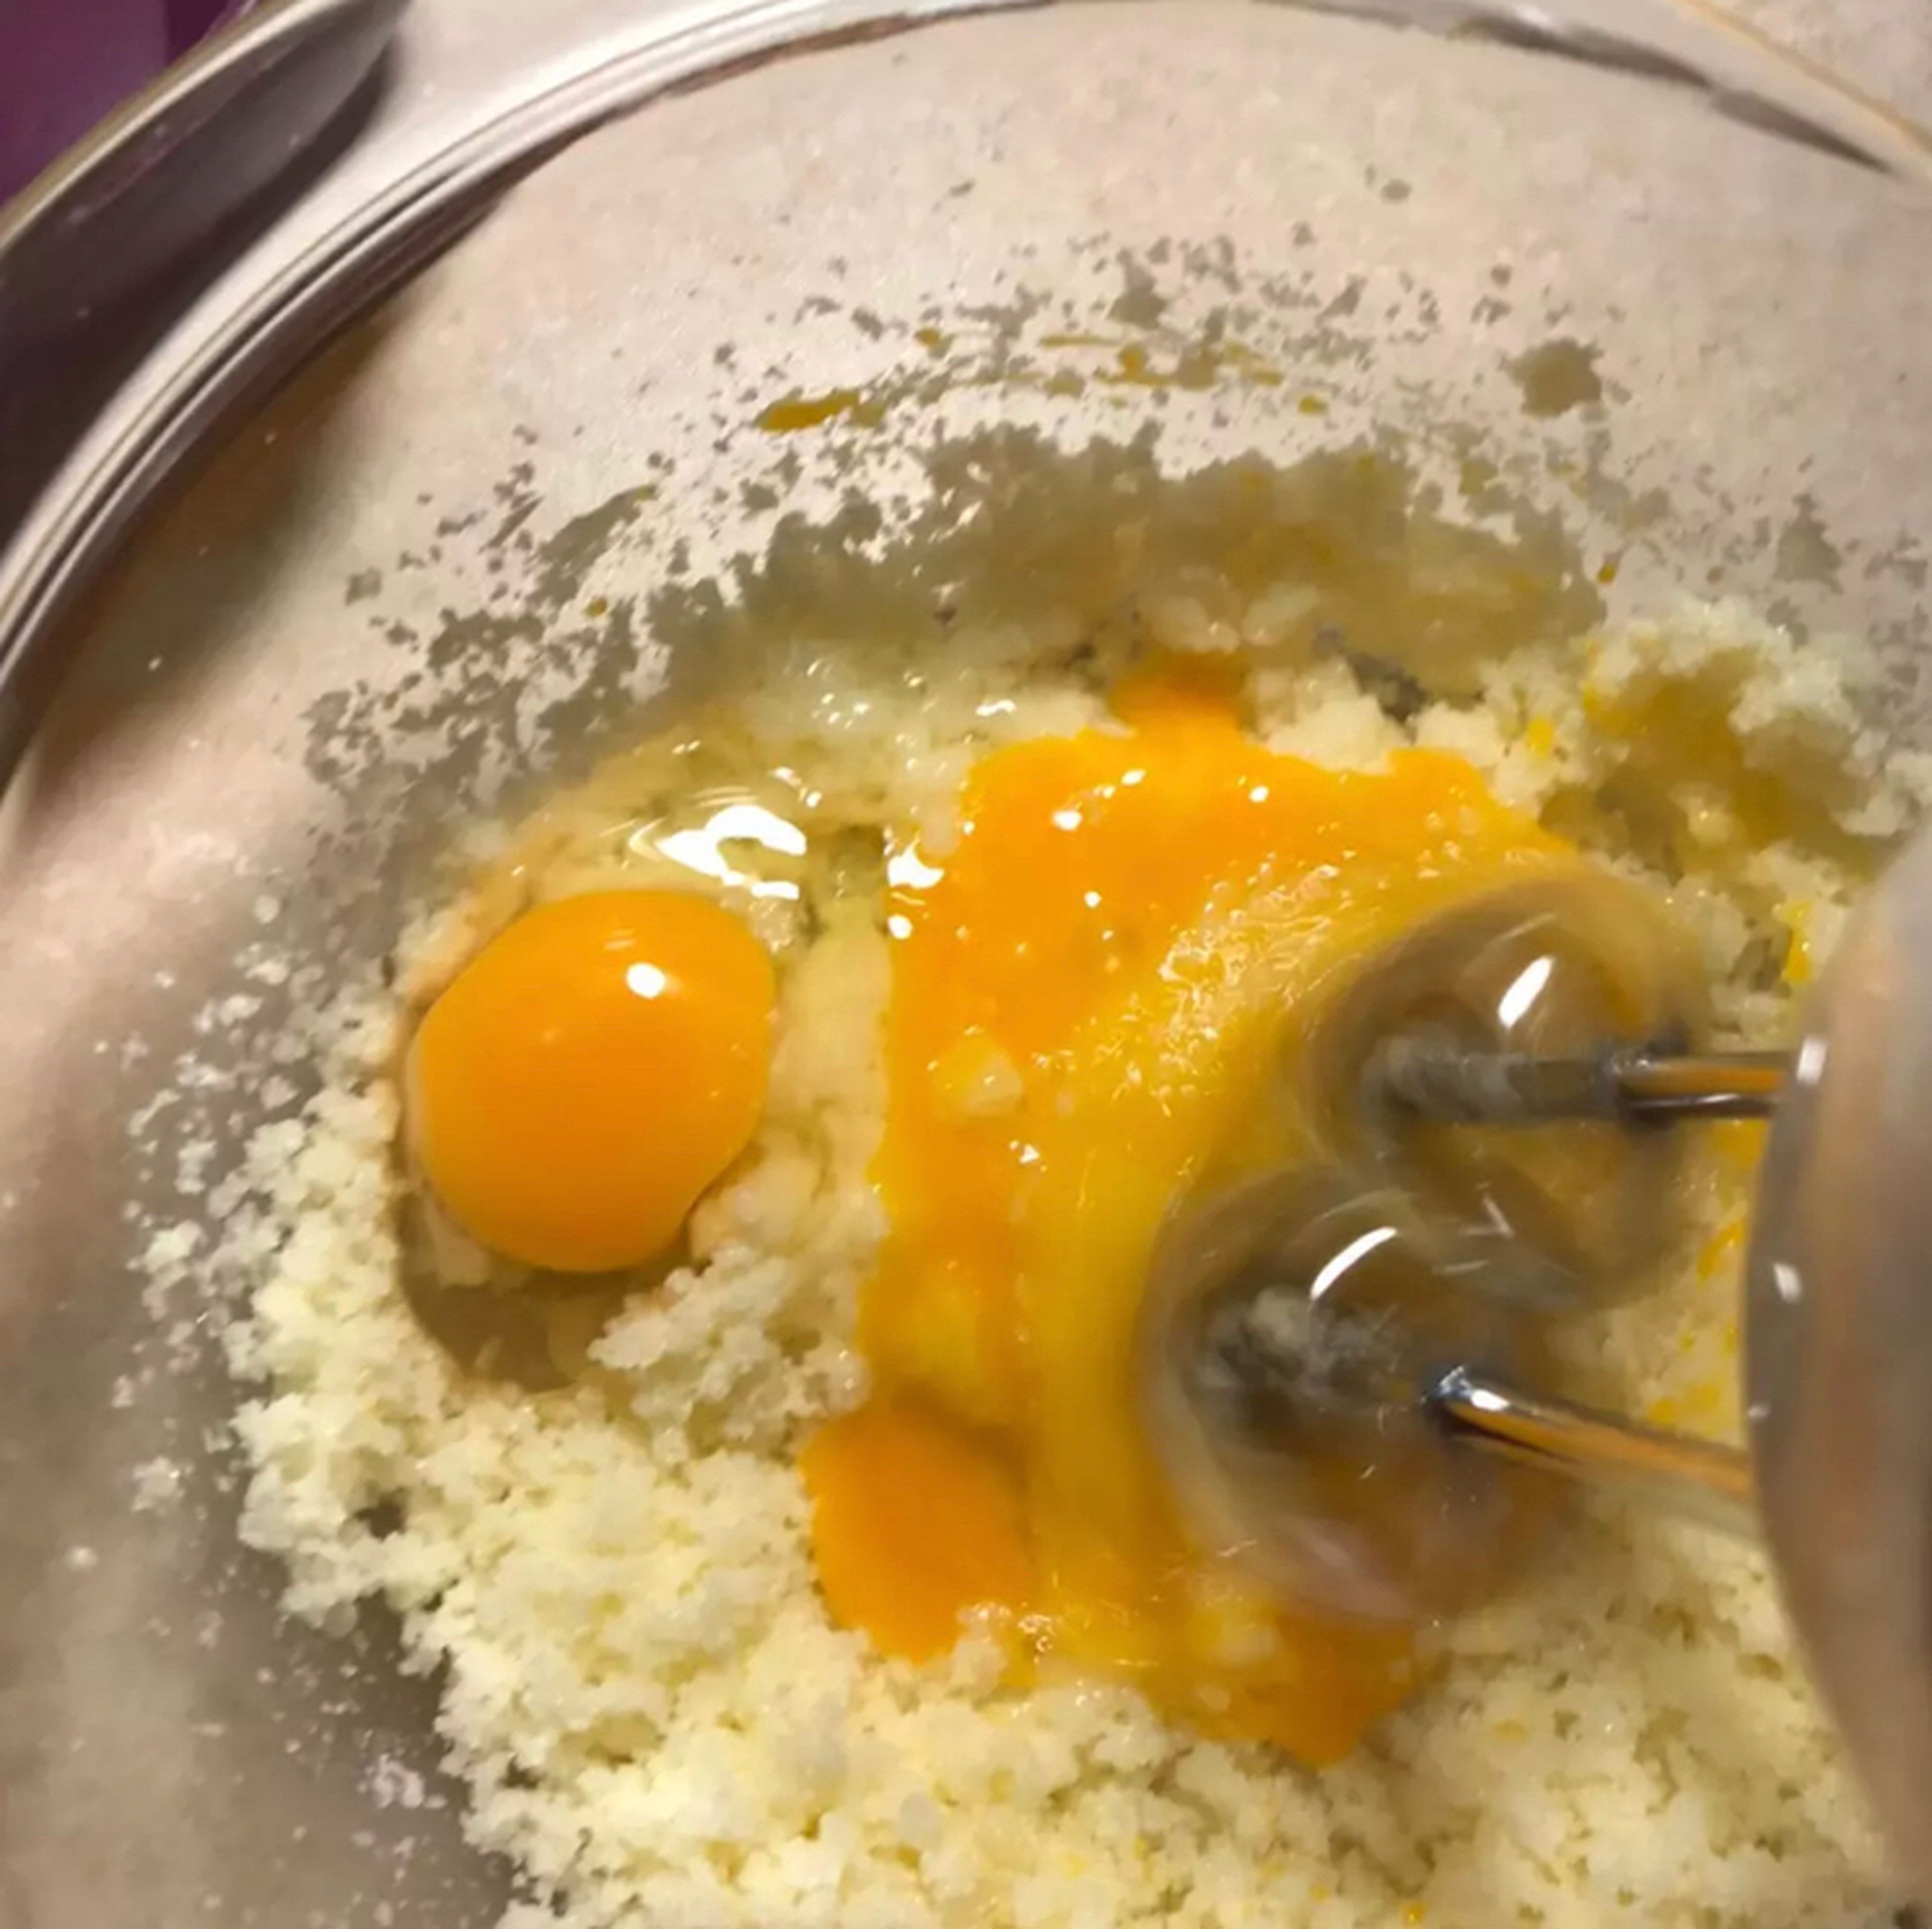 Turn on the oven at 180 degrees Celsius to heat. Mix the softened butter at home temperature with sugar and vanilla. To the extent of mixing. Then add the egg. Mix with an electric mixer for about 4-5 minutes. Add milk and mix.